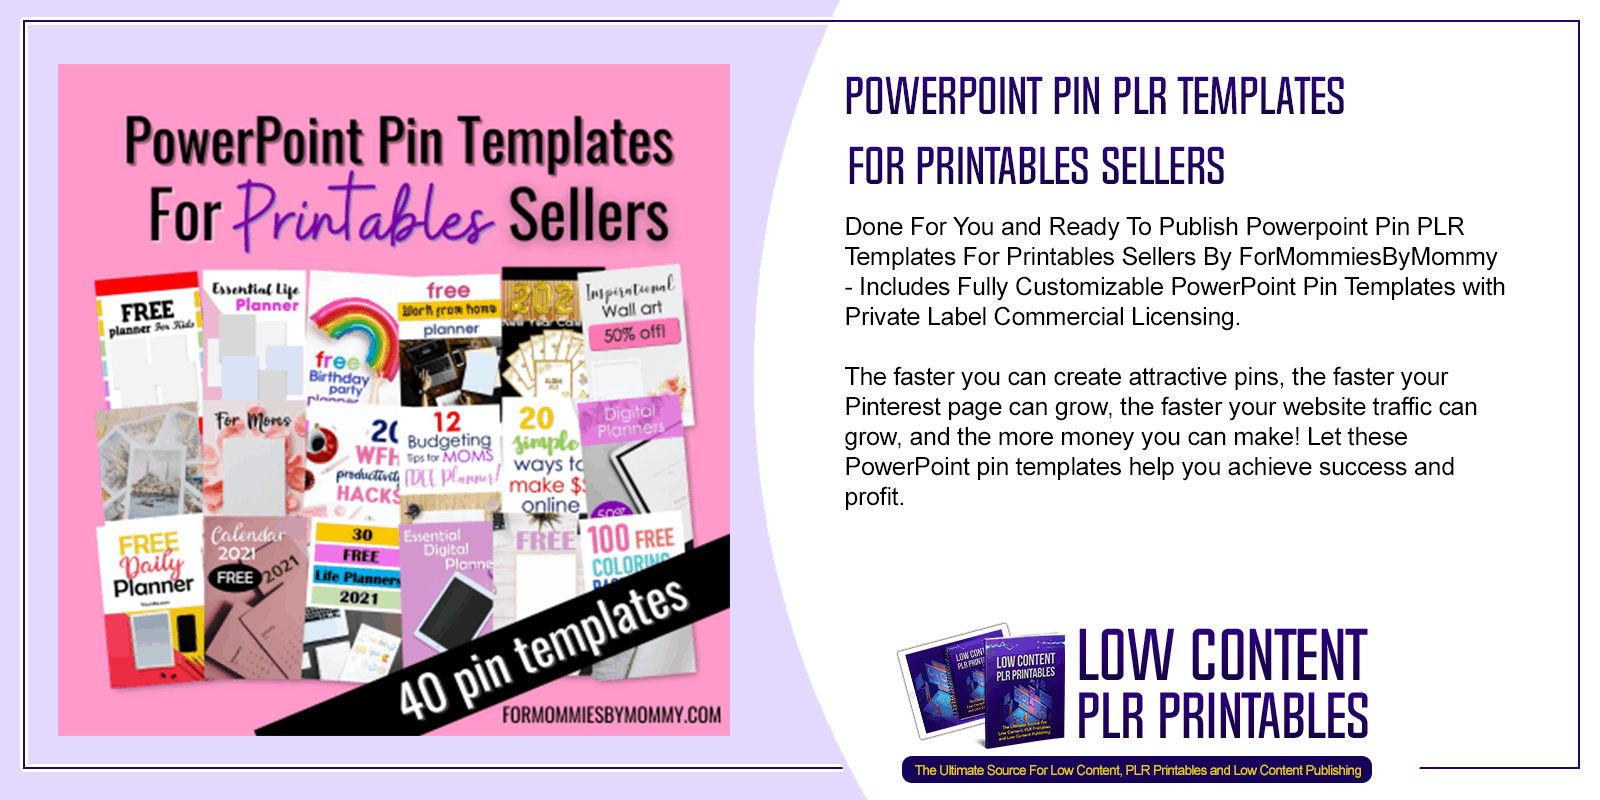 Powerpoint Pin PLR Templates For Printables Sellers